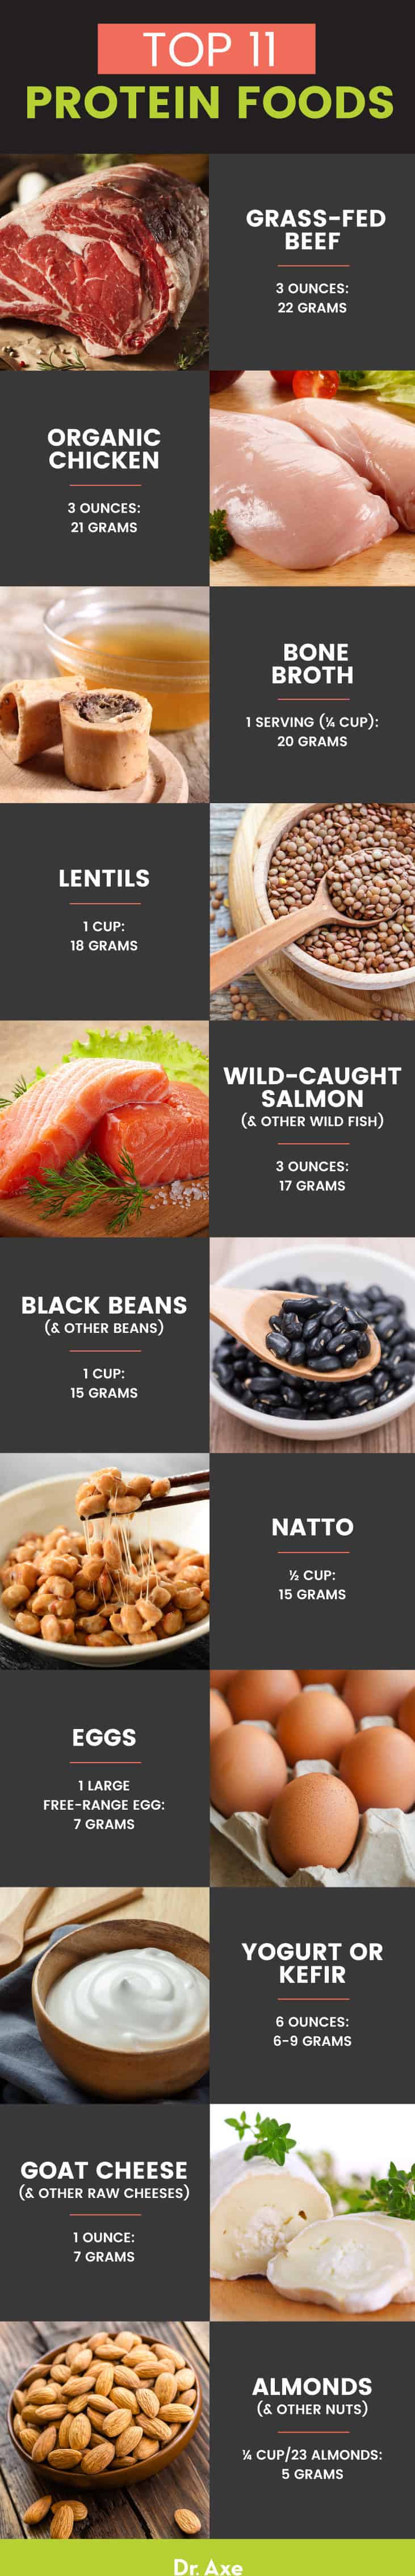 Top 11 protein foods - Dr. Axe